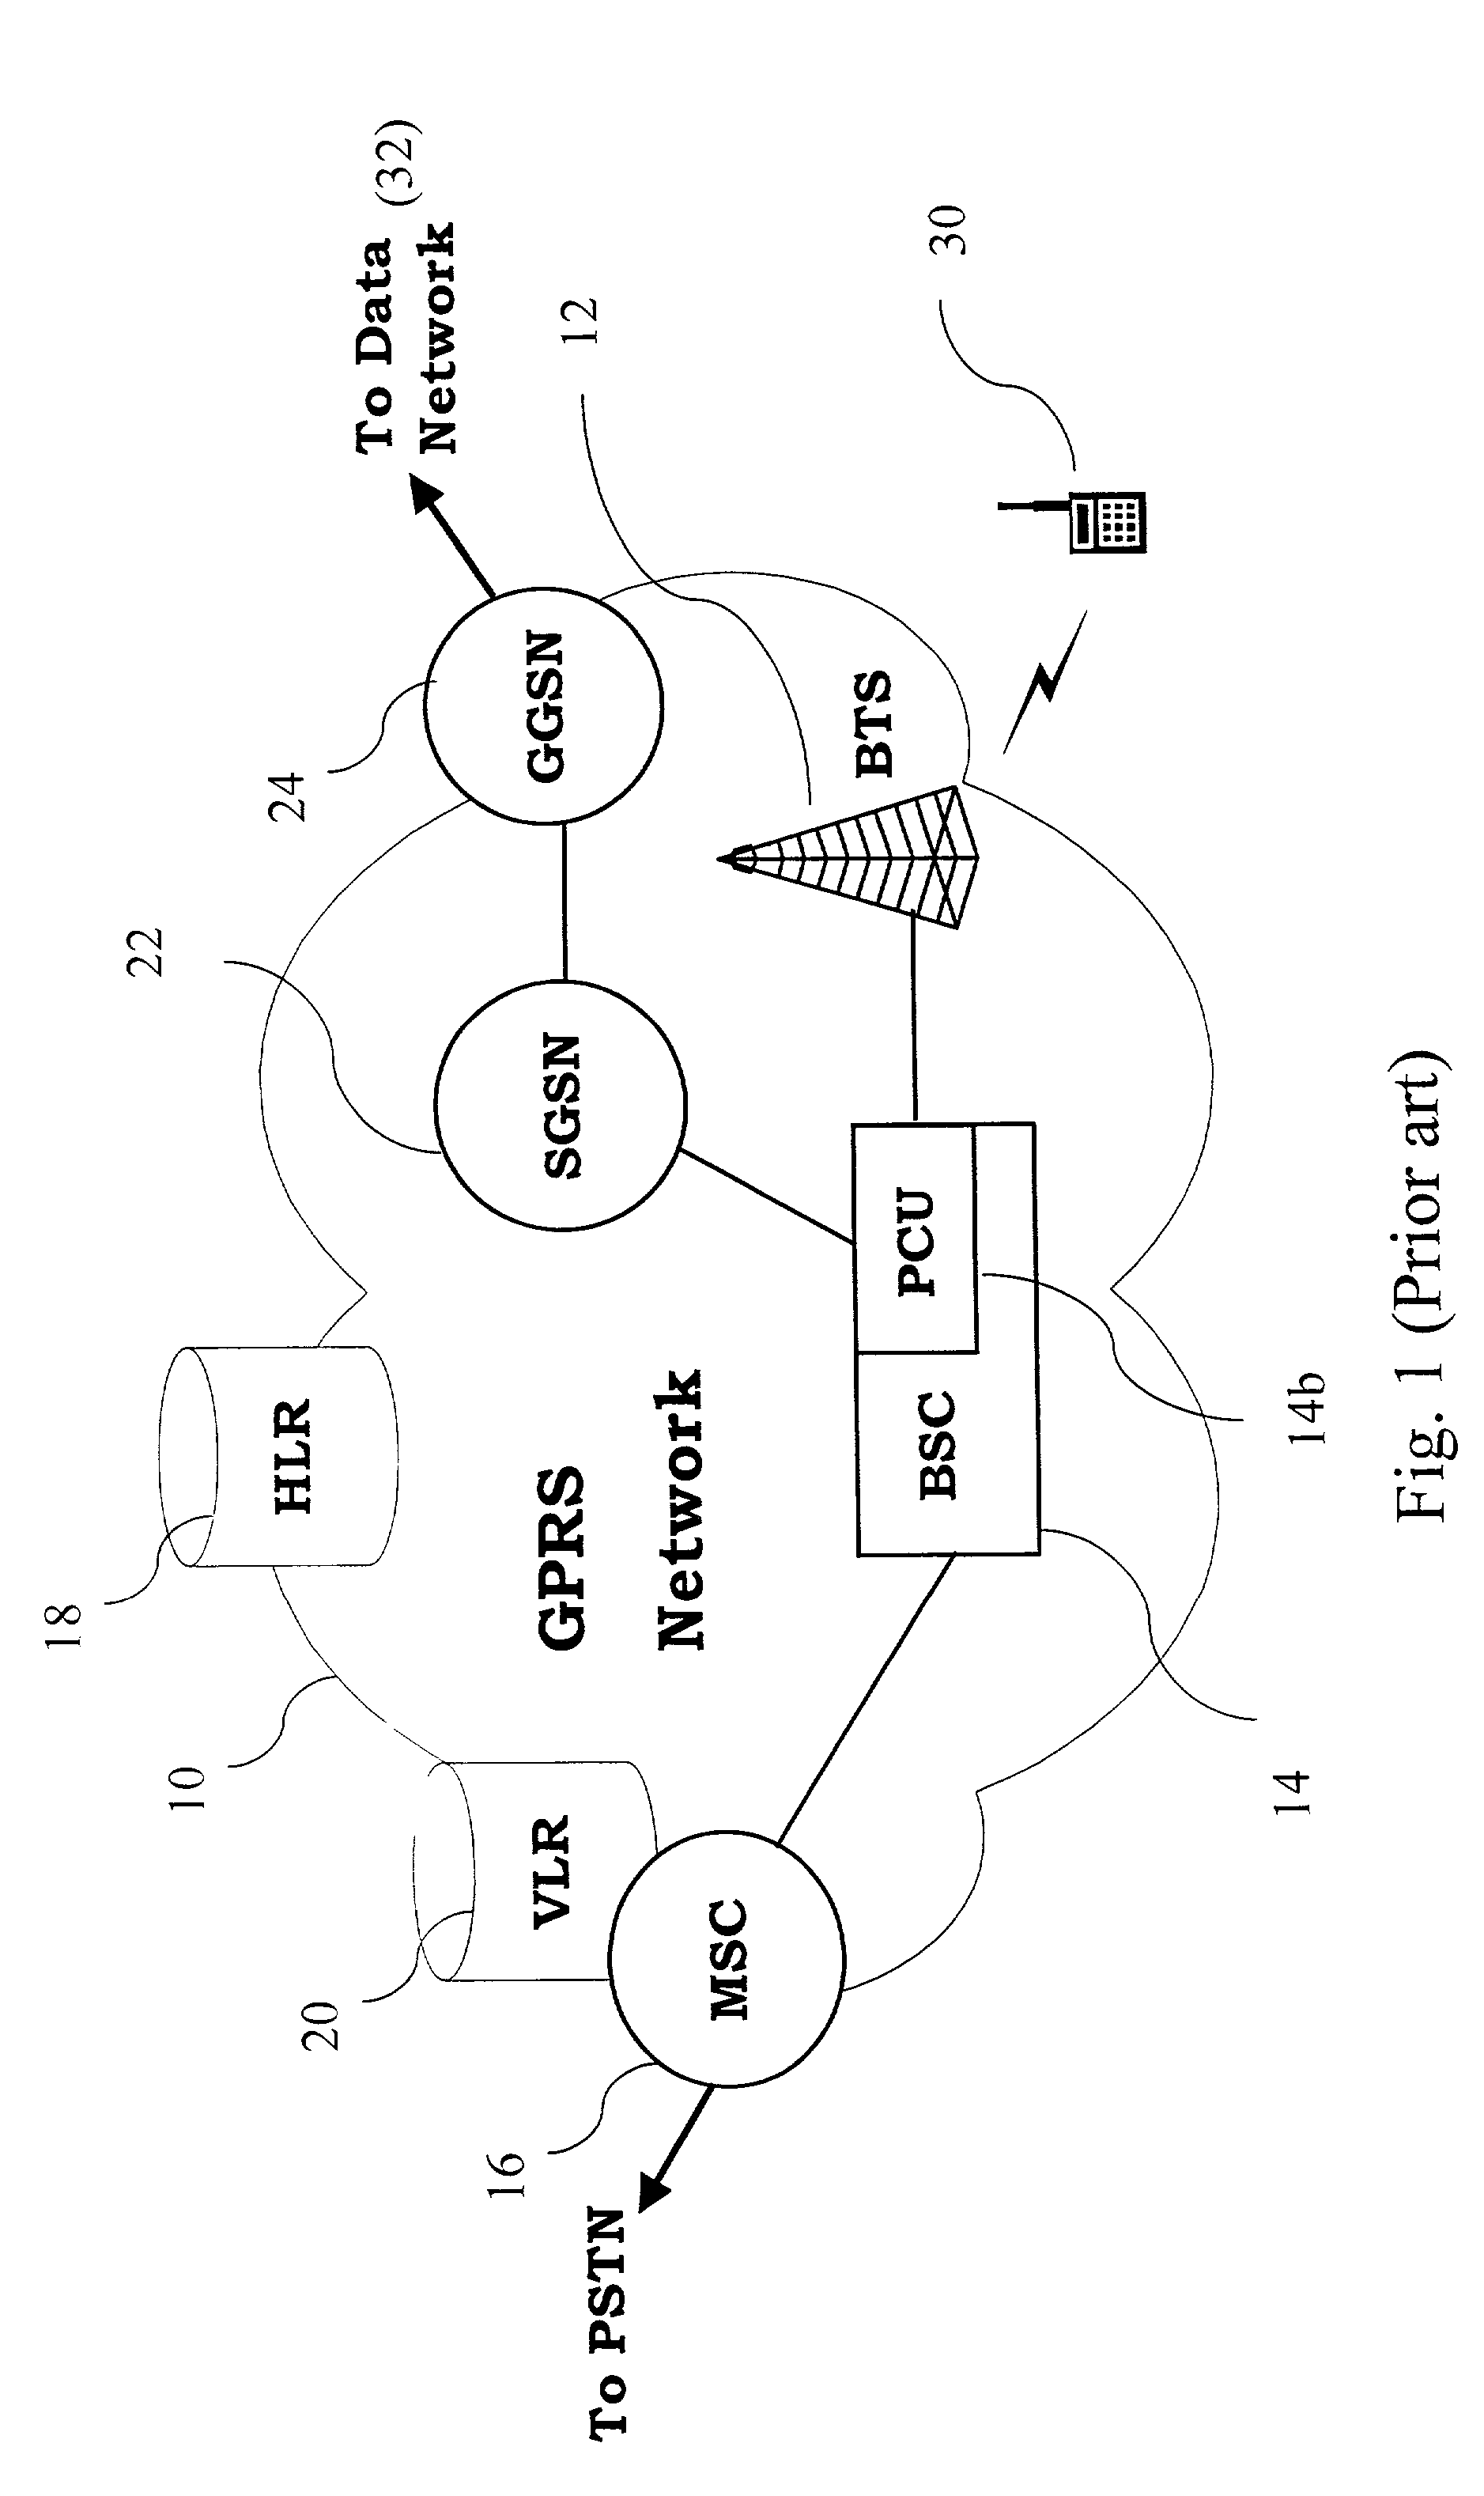 System and method for providing voice communications for radio network